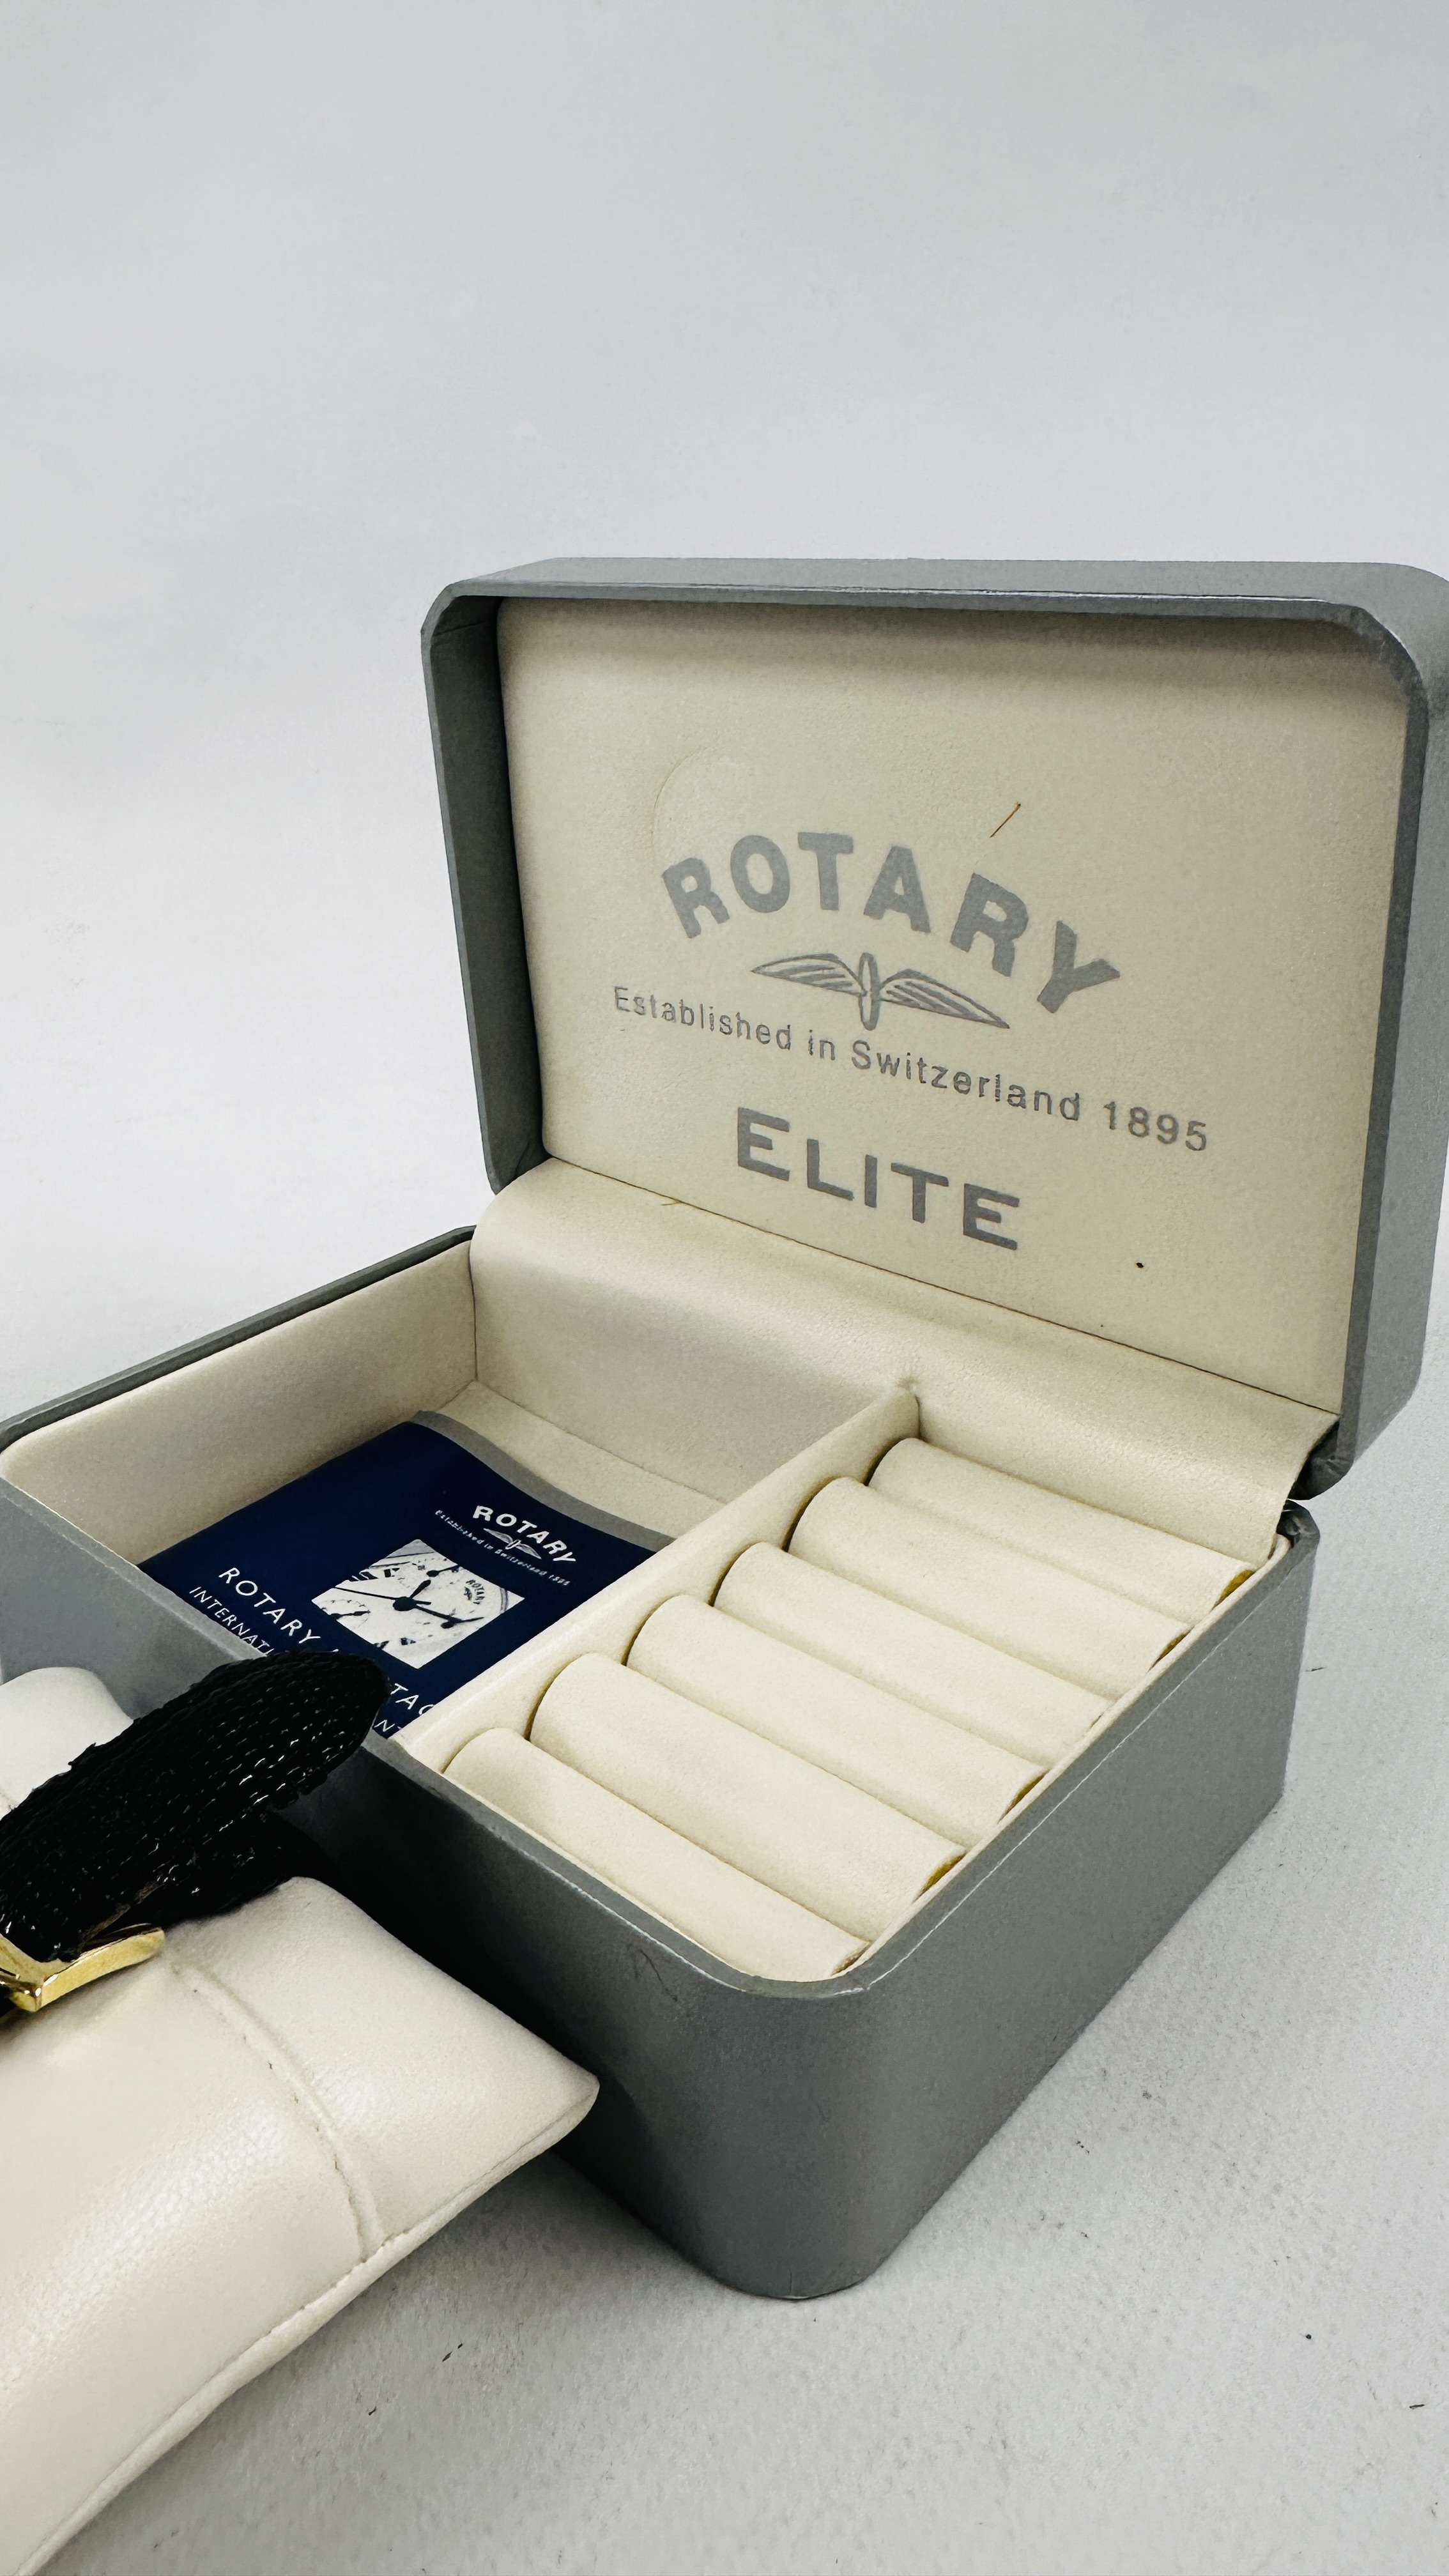 A GENT'S ROTARY ELITE 9CT GOLD CASED WRIST WATCH ON A BLACK LEATHER STRAP (BOXED). - Image 7 of 7